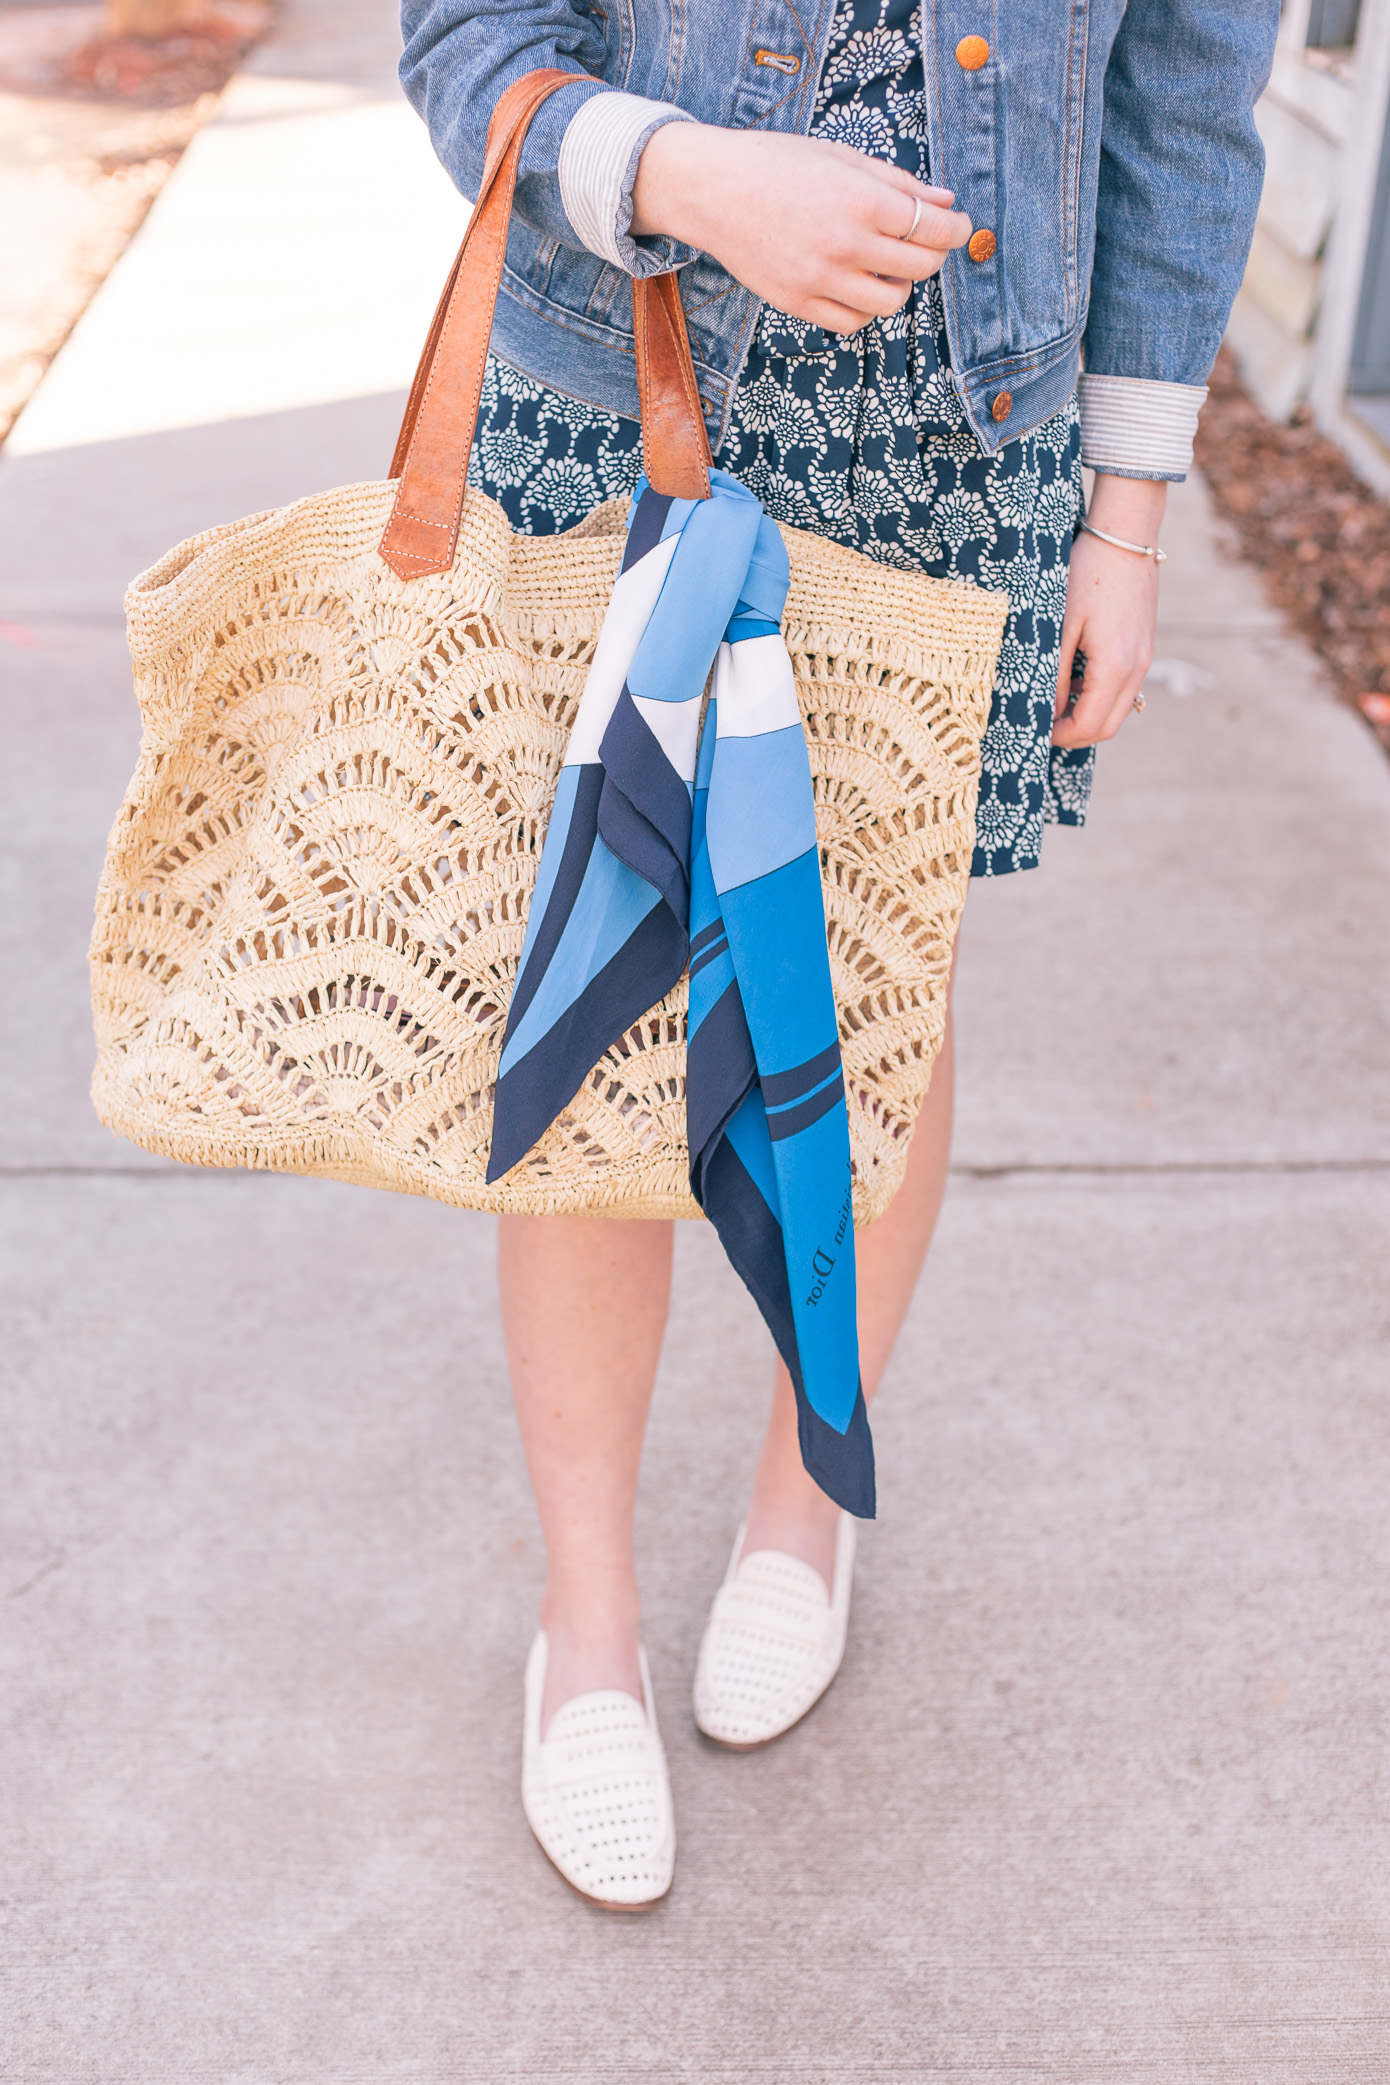 Casual Knit Dress for Spring + Oversized Straw Tote | Louella Reese Life & Style Blog